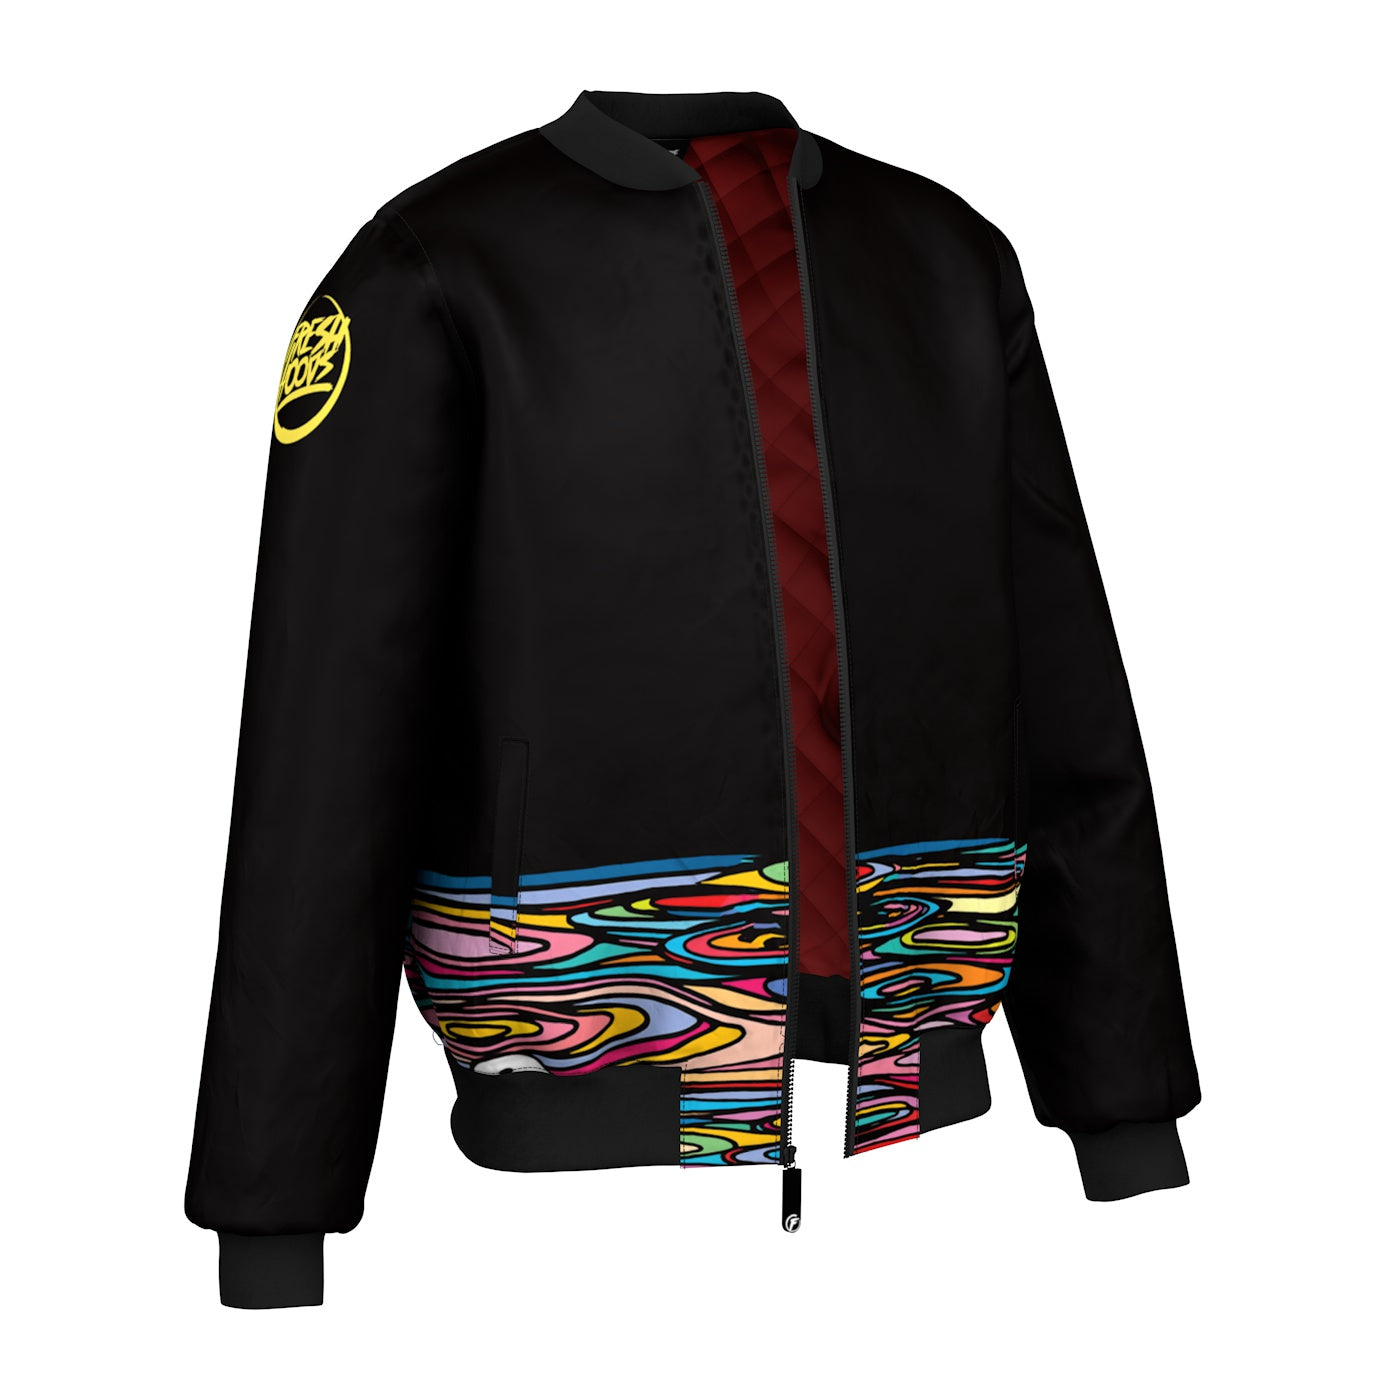 Space Vacation Bomber Jacket